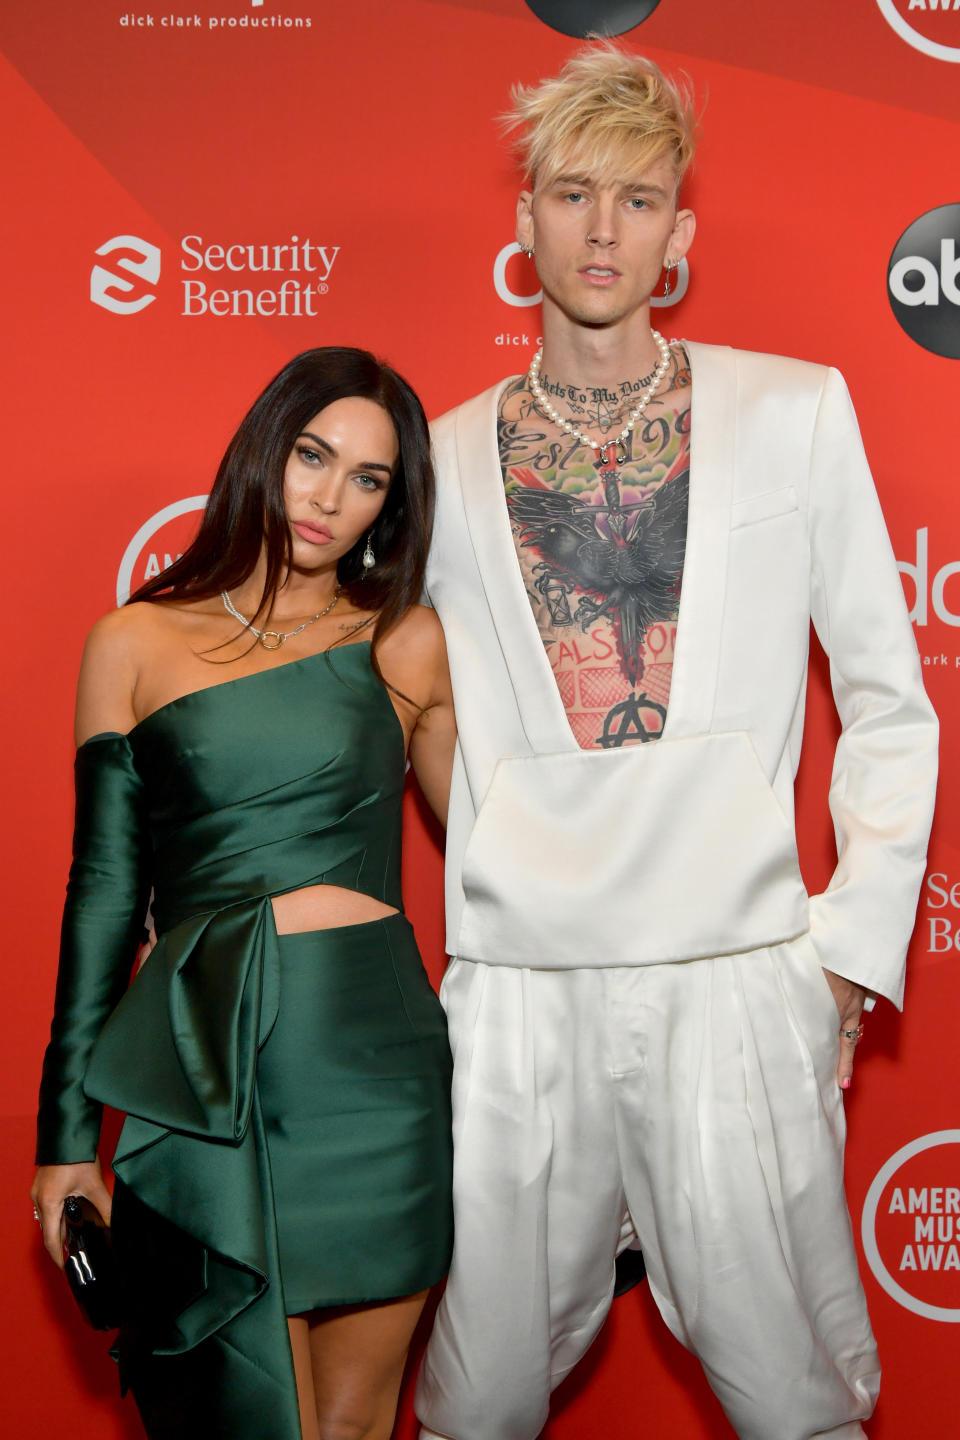 LOS ANGELES, CALIFORNIA - NOVEMBER 22: (L-R) In this image released on November 22, Megan Fox and Machine Gun Kelly attend the 2020 American Music Awards at Microsoft Theater on November 22, 2020 in Los Angeles, California. (Photo by Emma McIntyre /AMA2020/Getty Images for dcp)